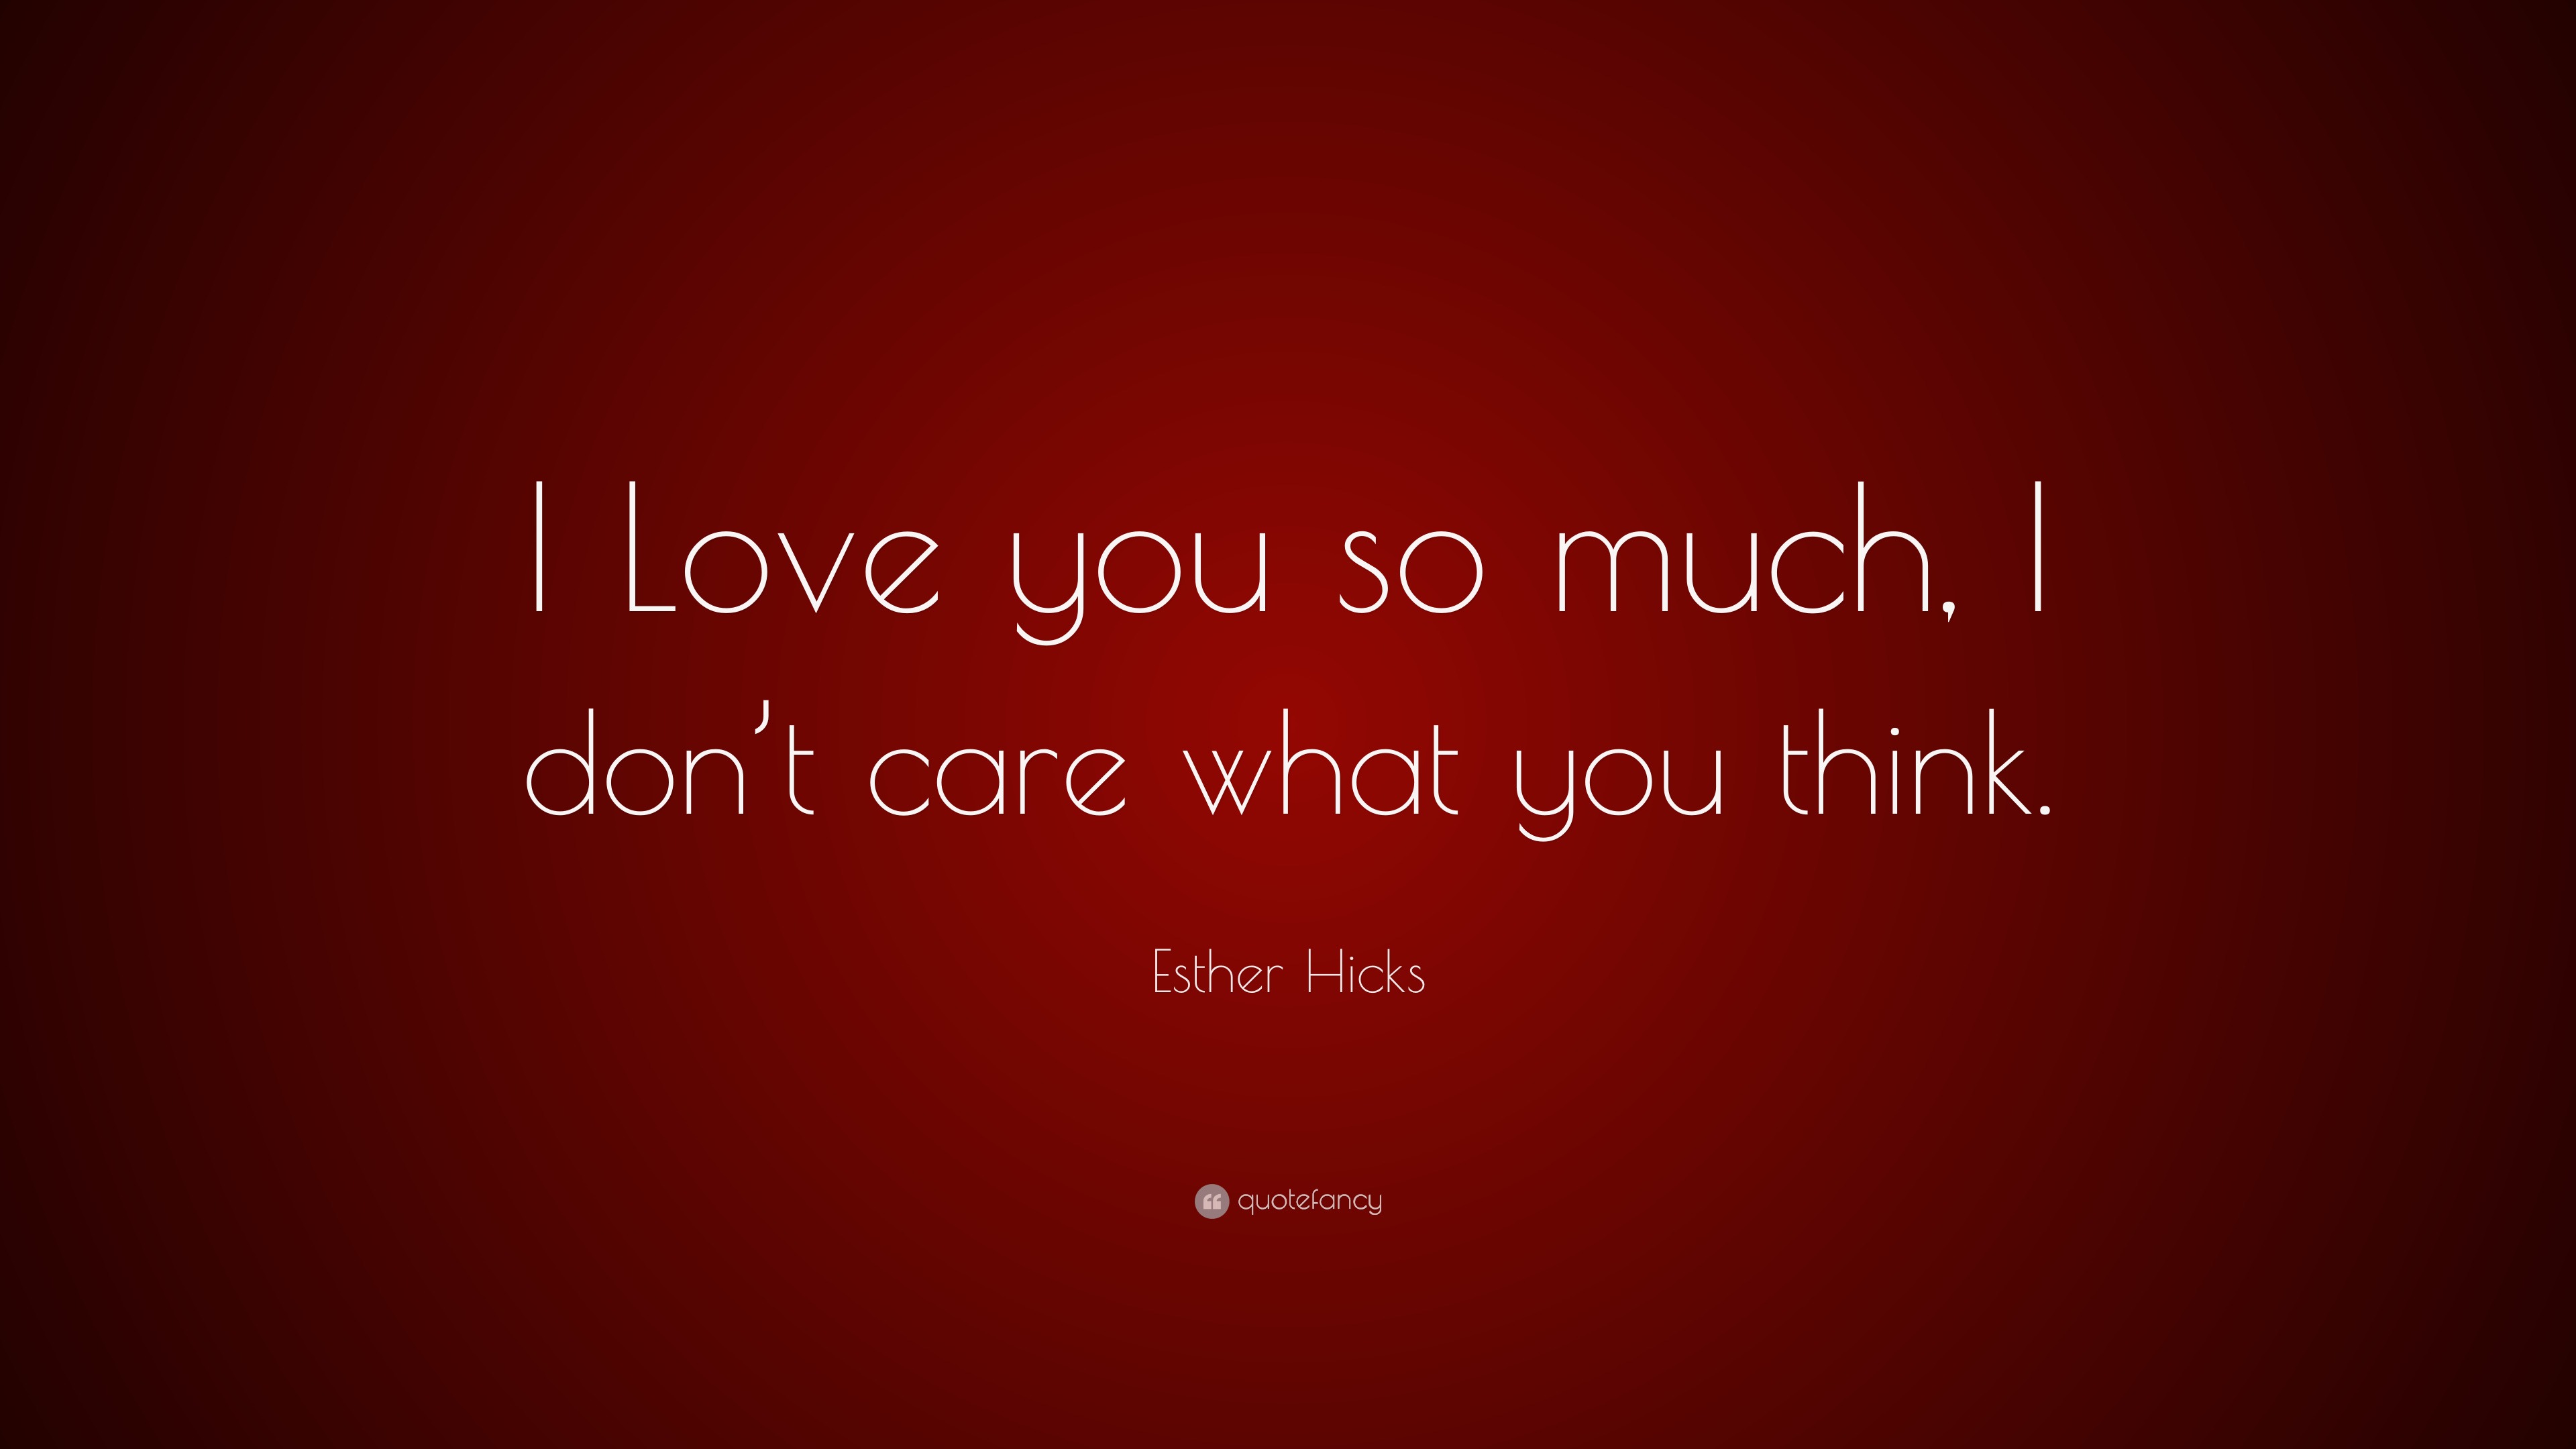 Esther Hicks Quote: “I Love you so much, I don’t care what you think